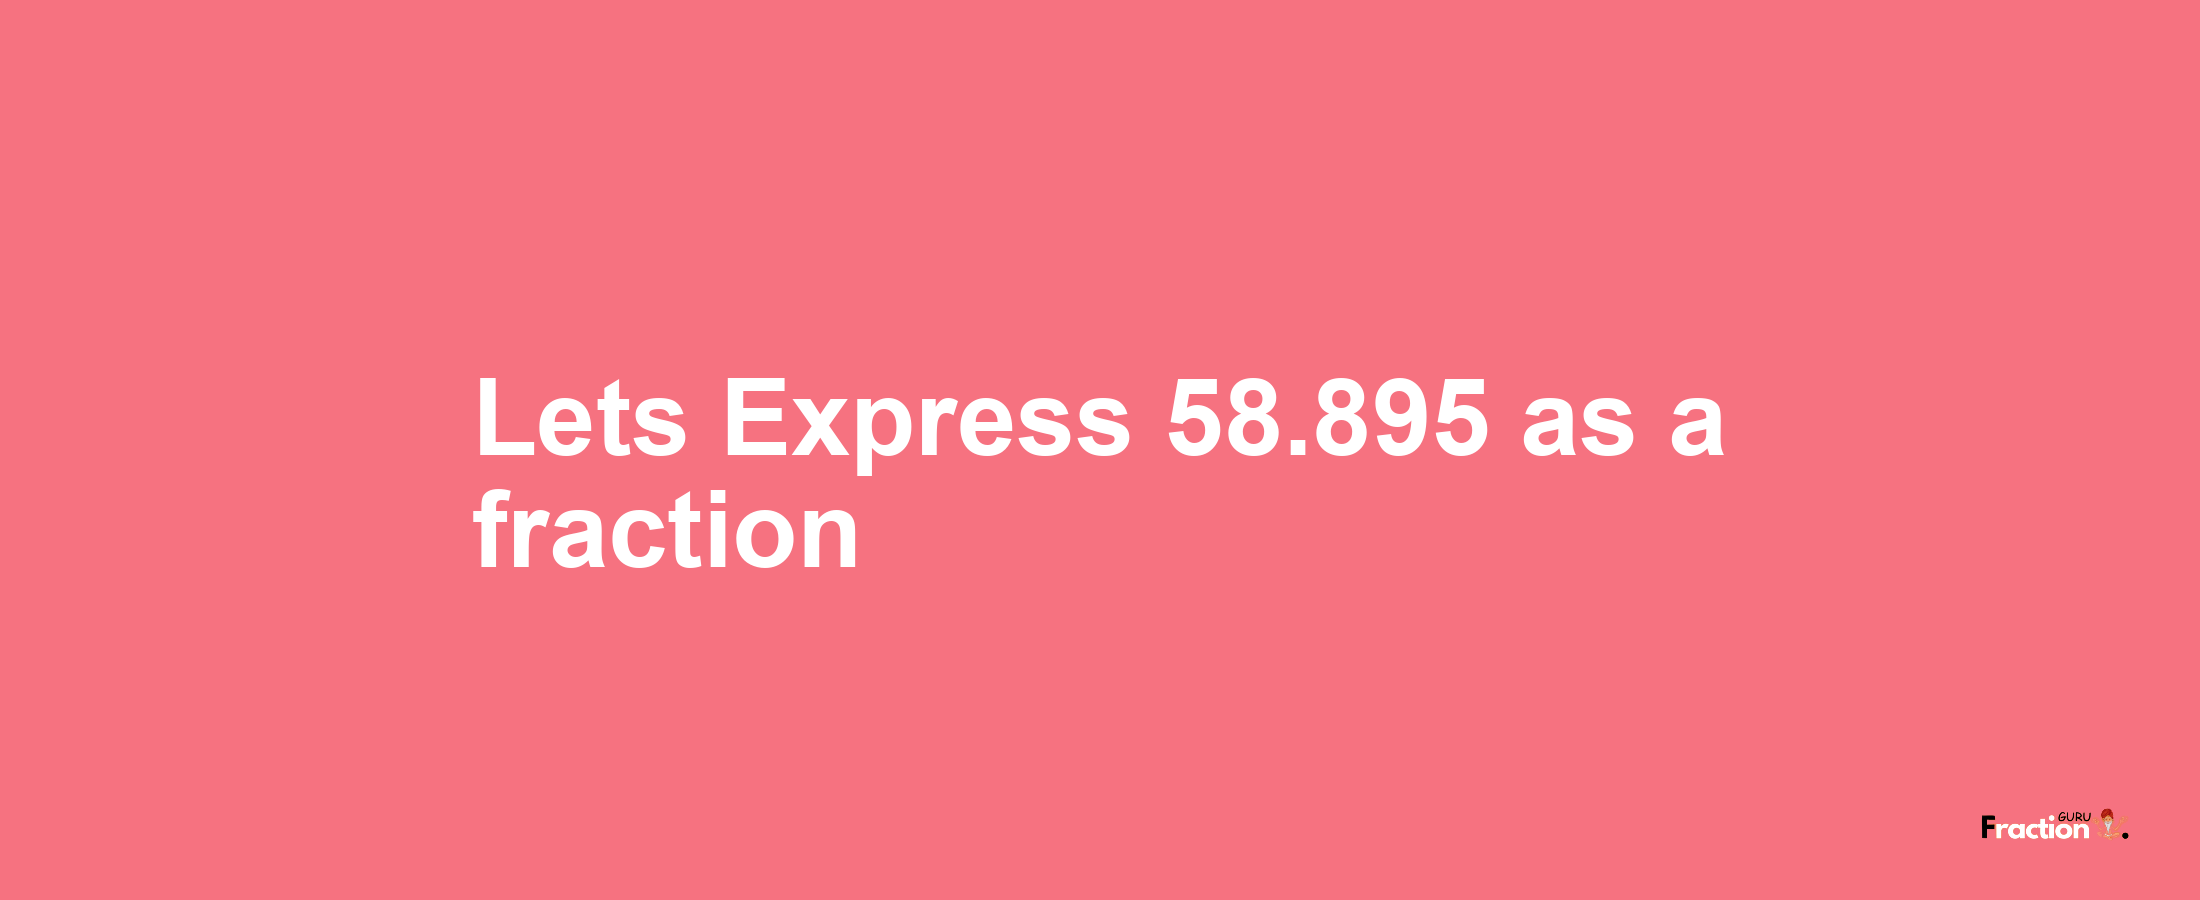 Lets Express 58.895 as afraction